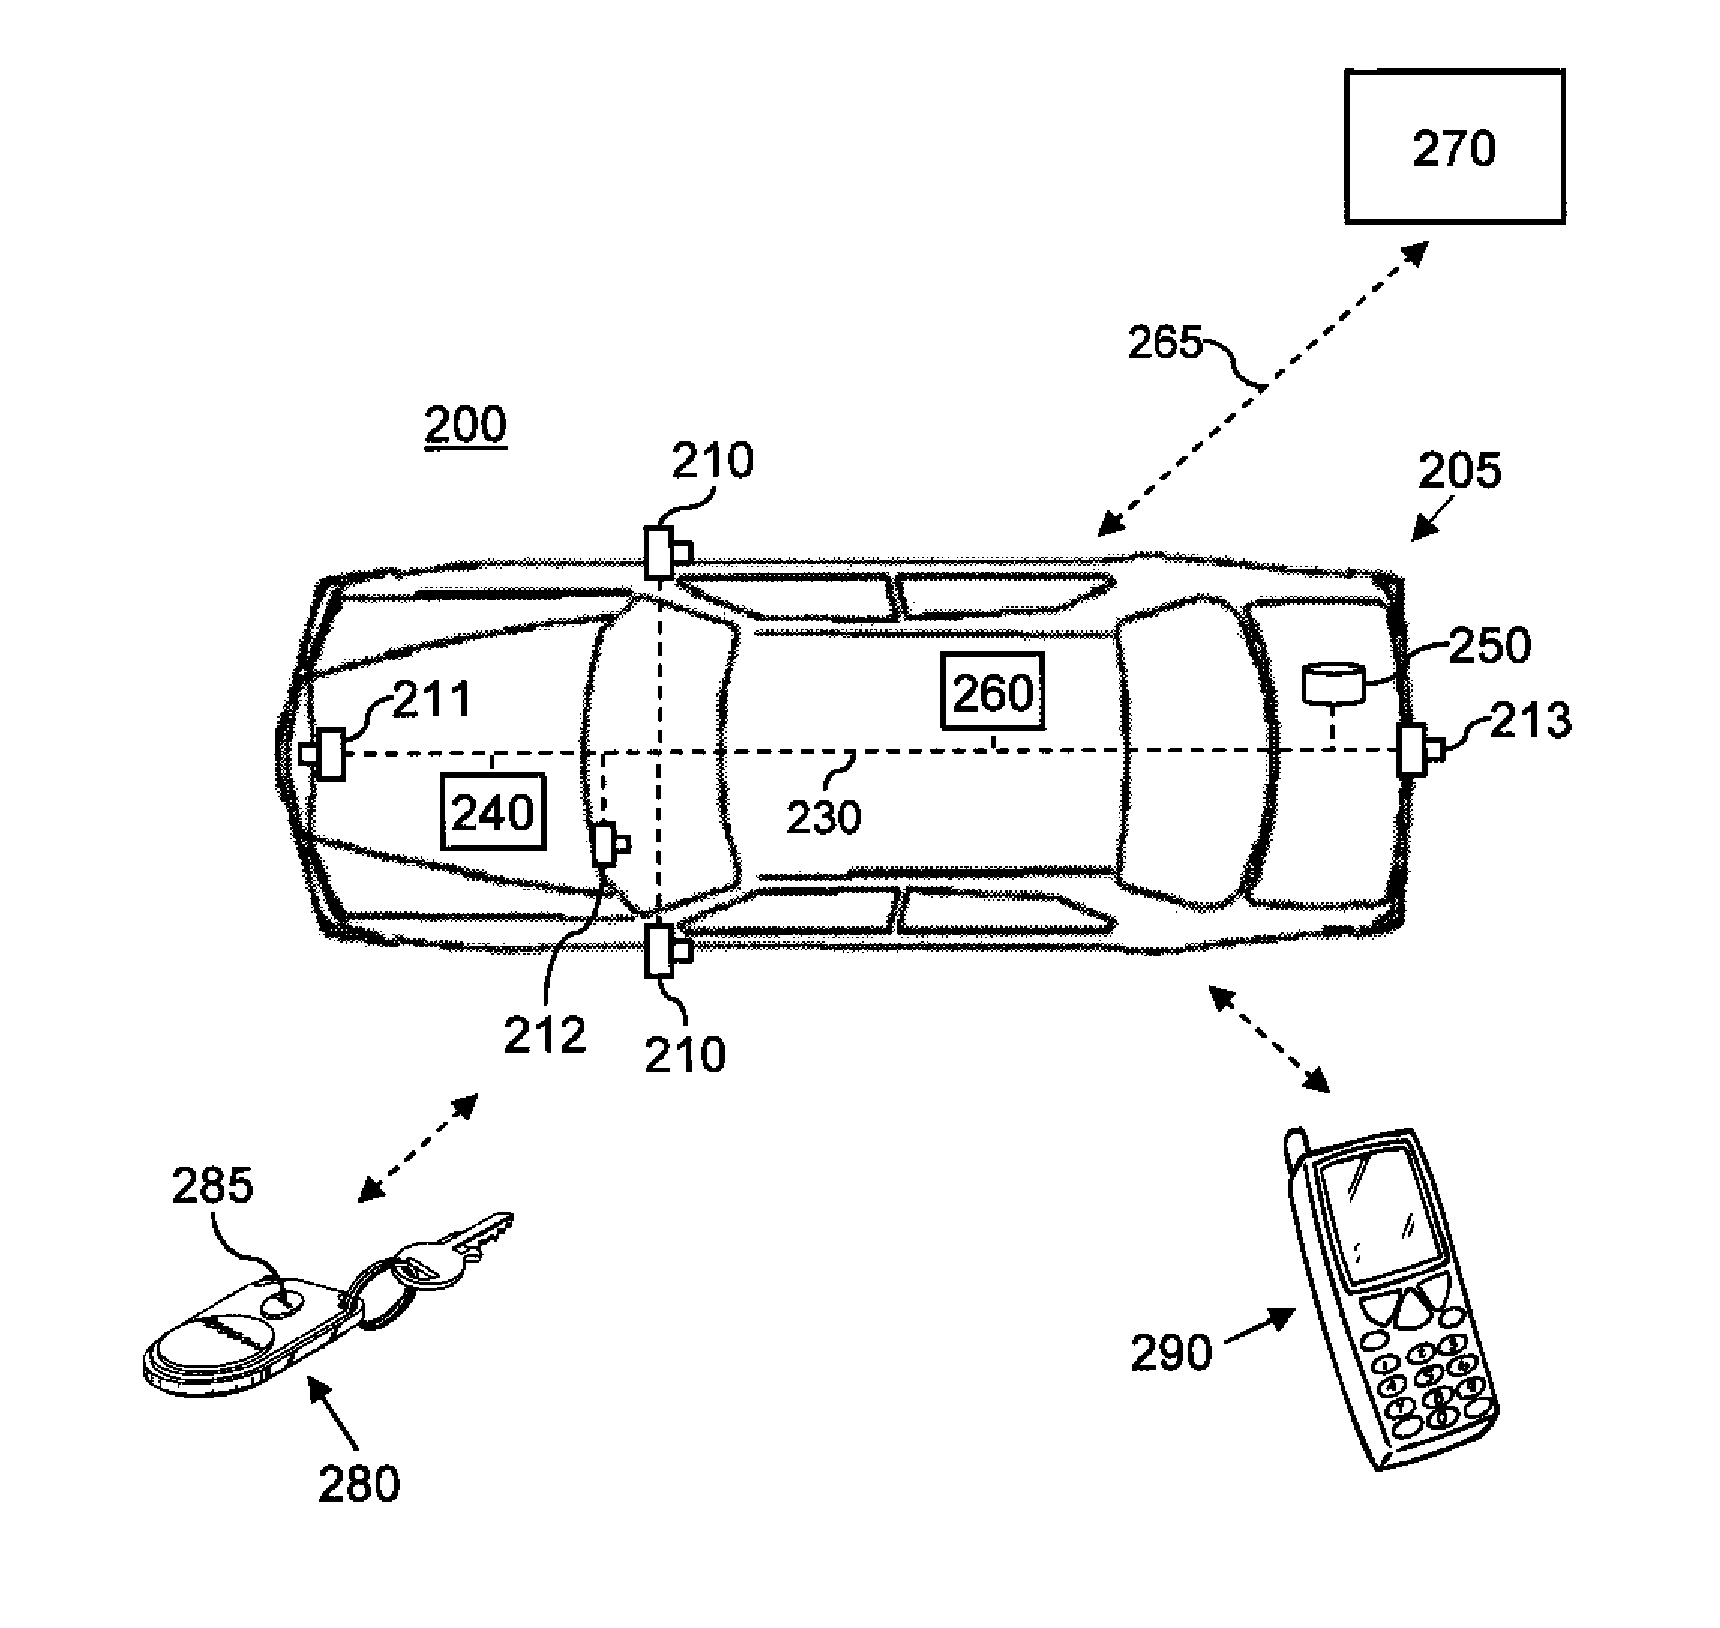 Automotive imaging system for recording exception events